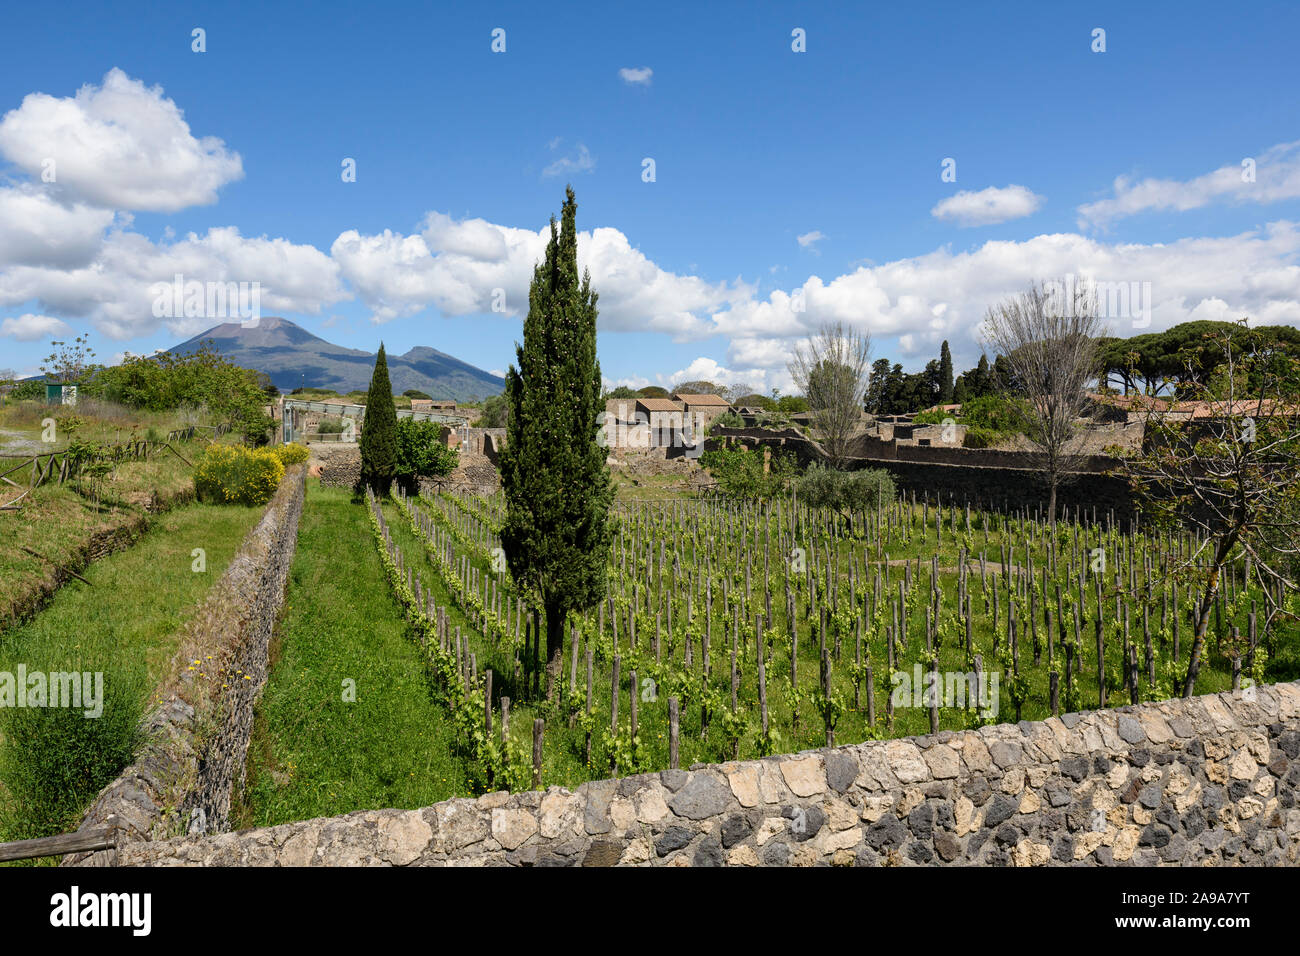 Pompei. Italy. Archaeological site of Pompeii. View of the southern district with vines planted on ancient vineyard sites, Mount Vesuvius is in the ba Stock Photo